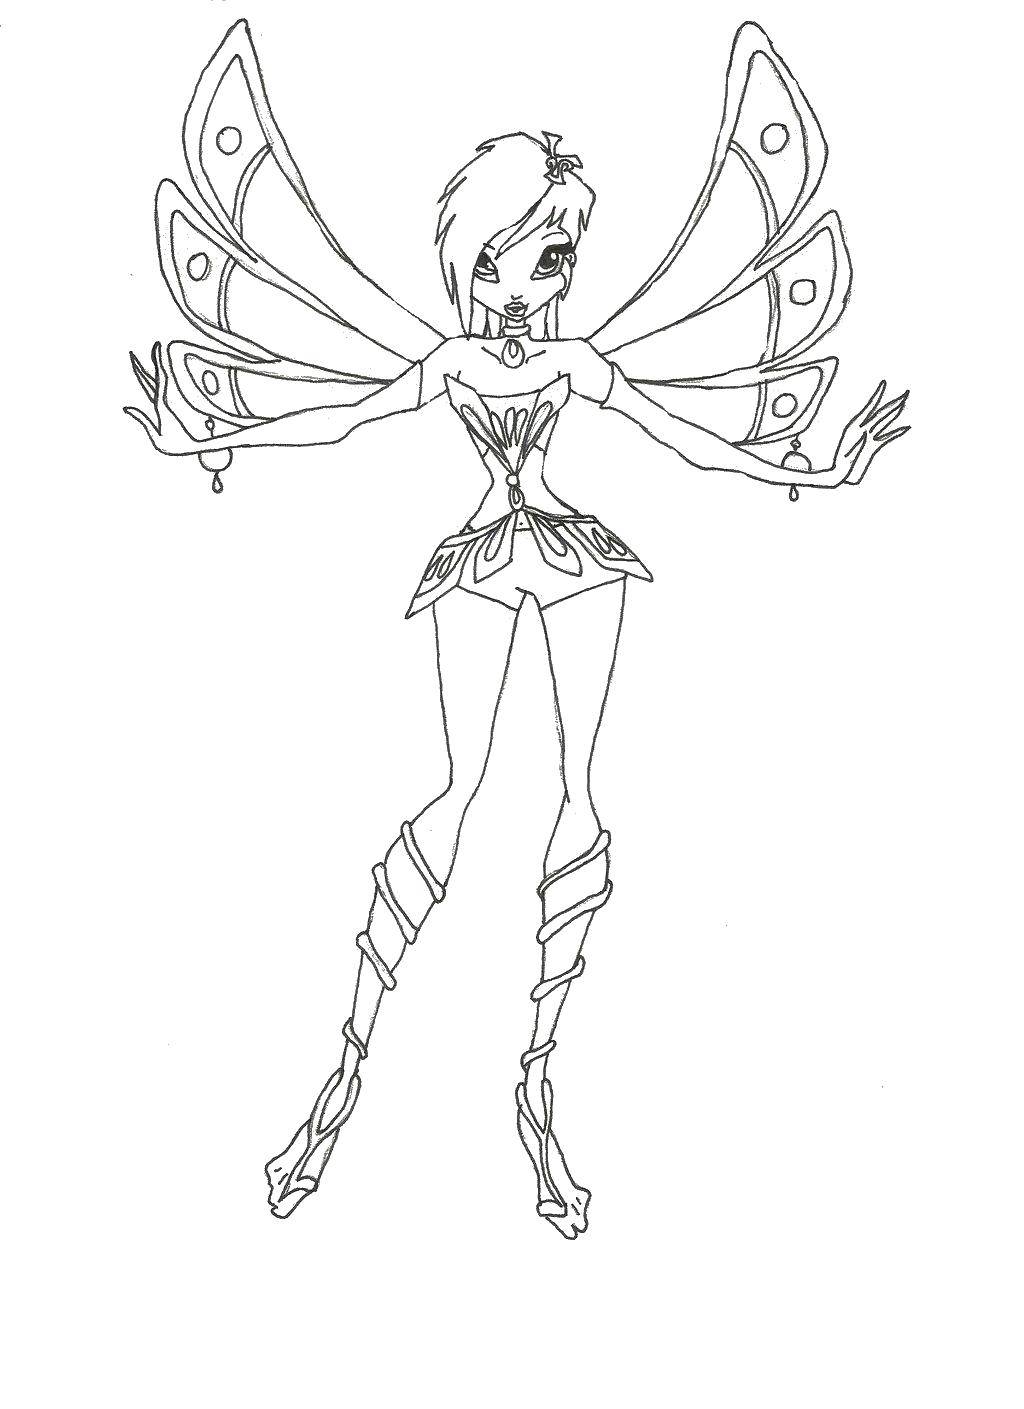 Coloring Tecna from winx cartoon with beautiful wings. Category Winx. Tags:  Character cartoon, Winx.